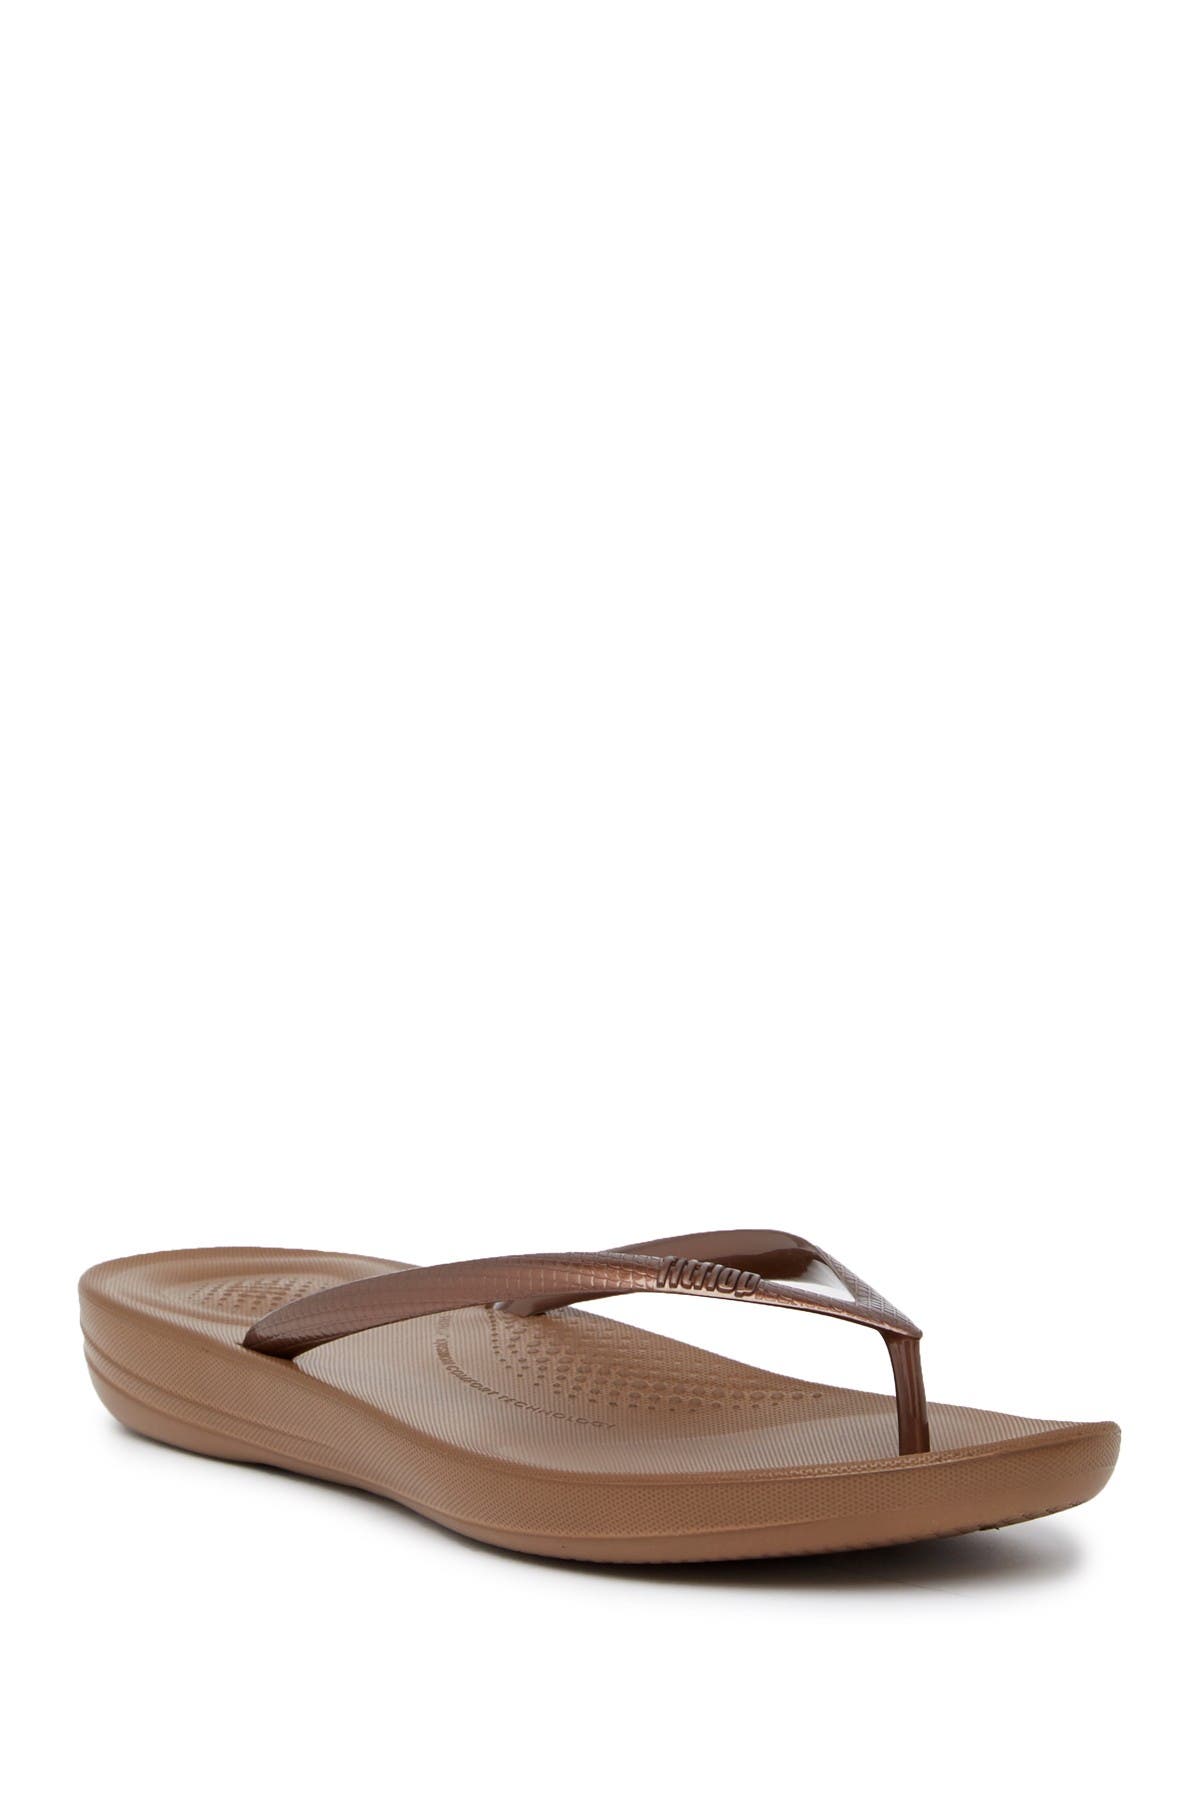 Fitflop | iQushion Flip Flop 